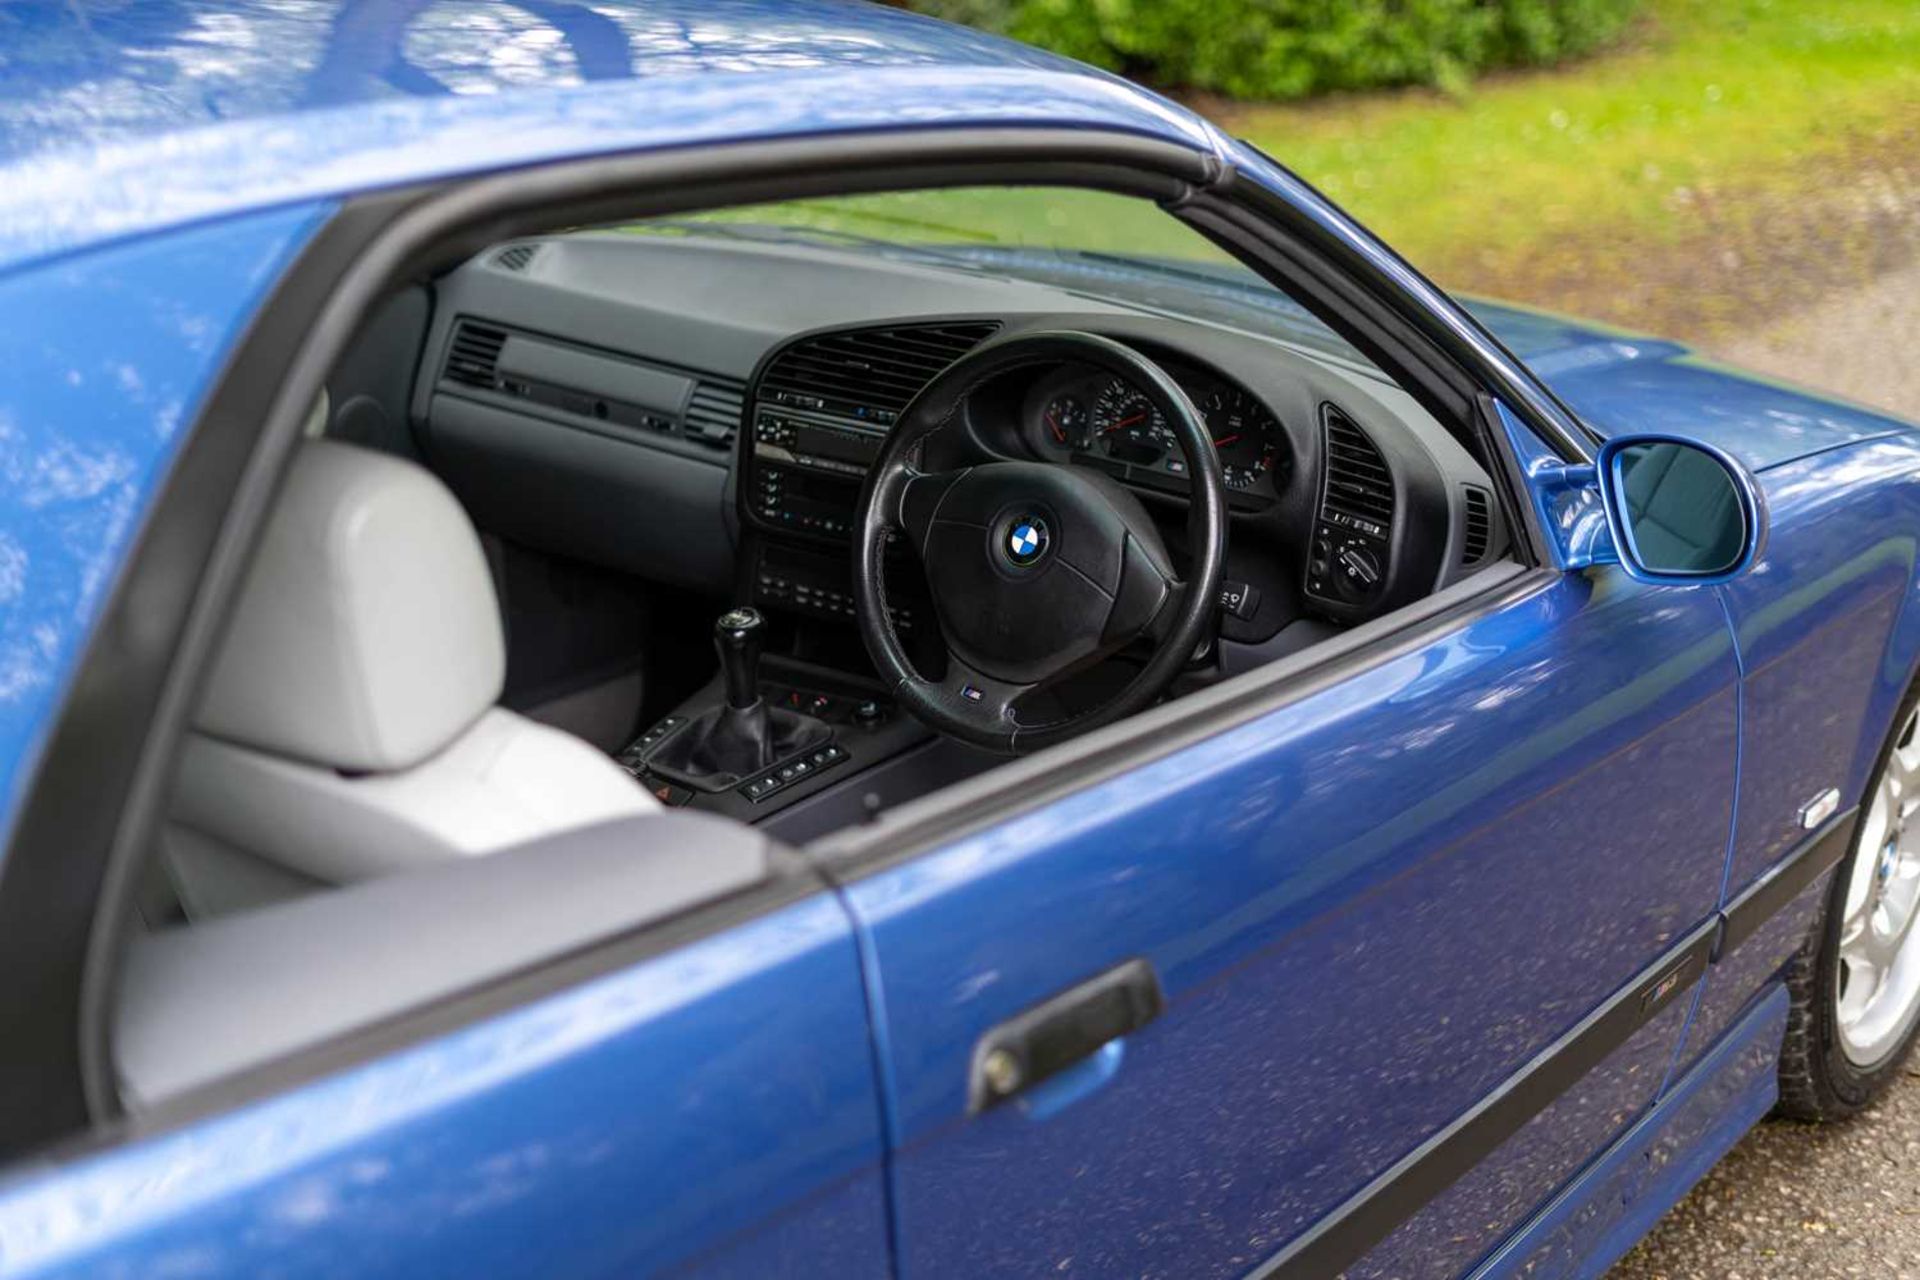 1998 BMW M3 Evolution Convertible Only 54,000 miles and full service history - Image 57 of 89